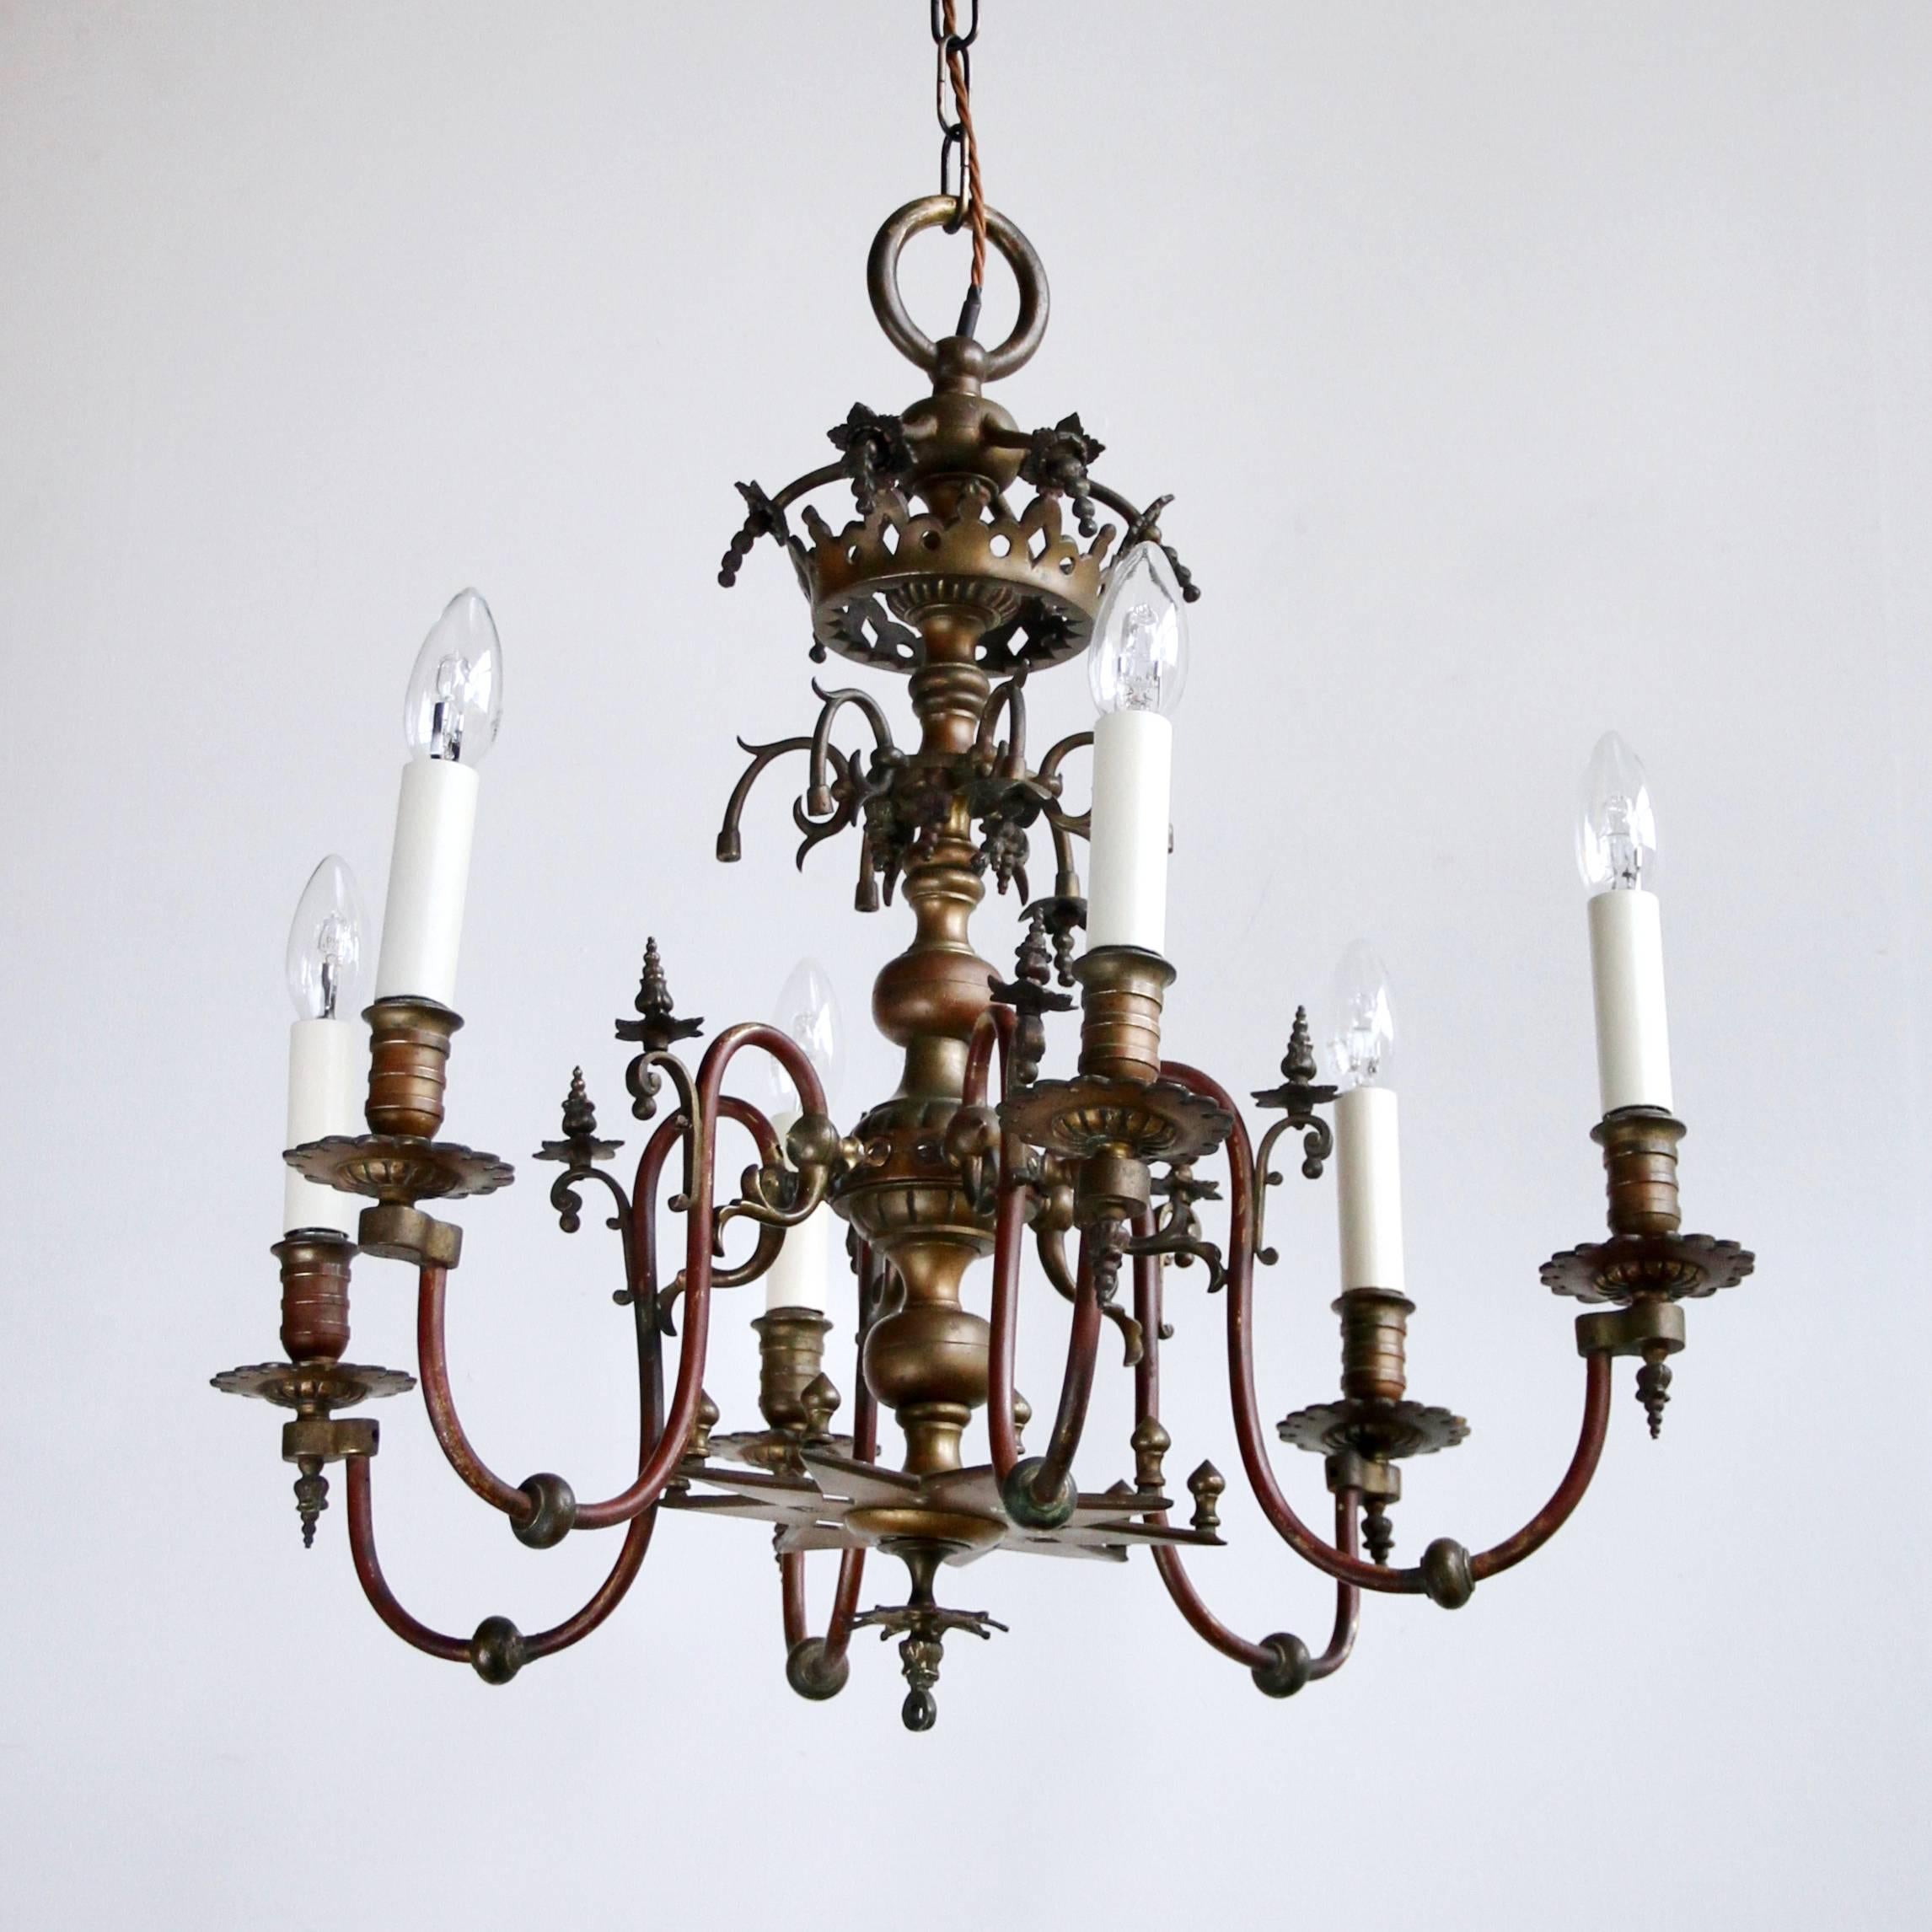 This electrified gasolier chandelier originates from the mid-19th century. The chandelier frame is made from bronze and copper and holds six lamps in total. With floral decorative bronze crowns and finials and the original rich burgundy paint on the